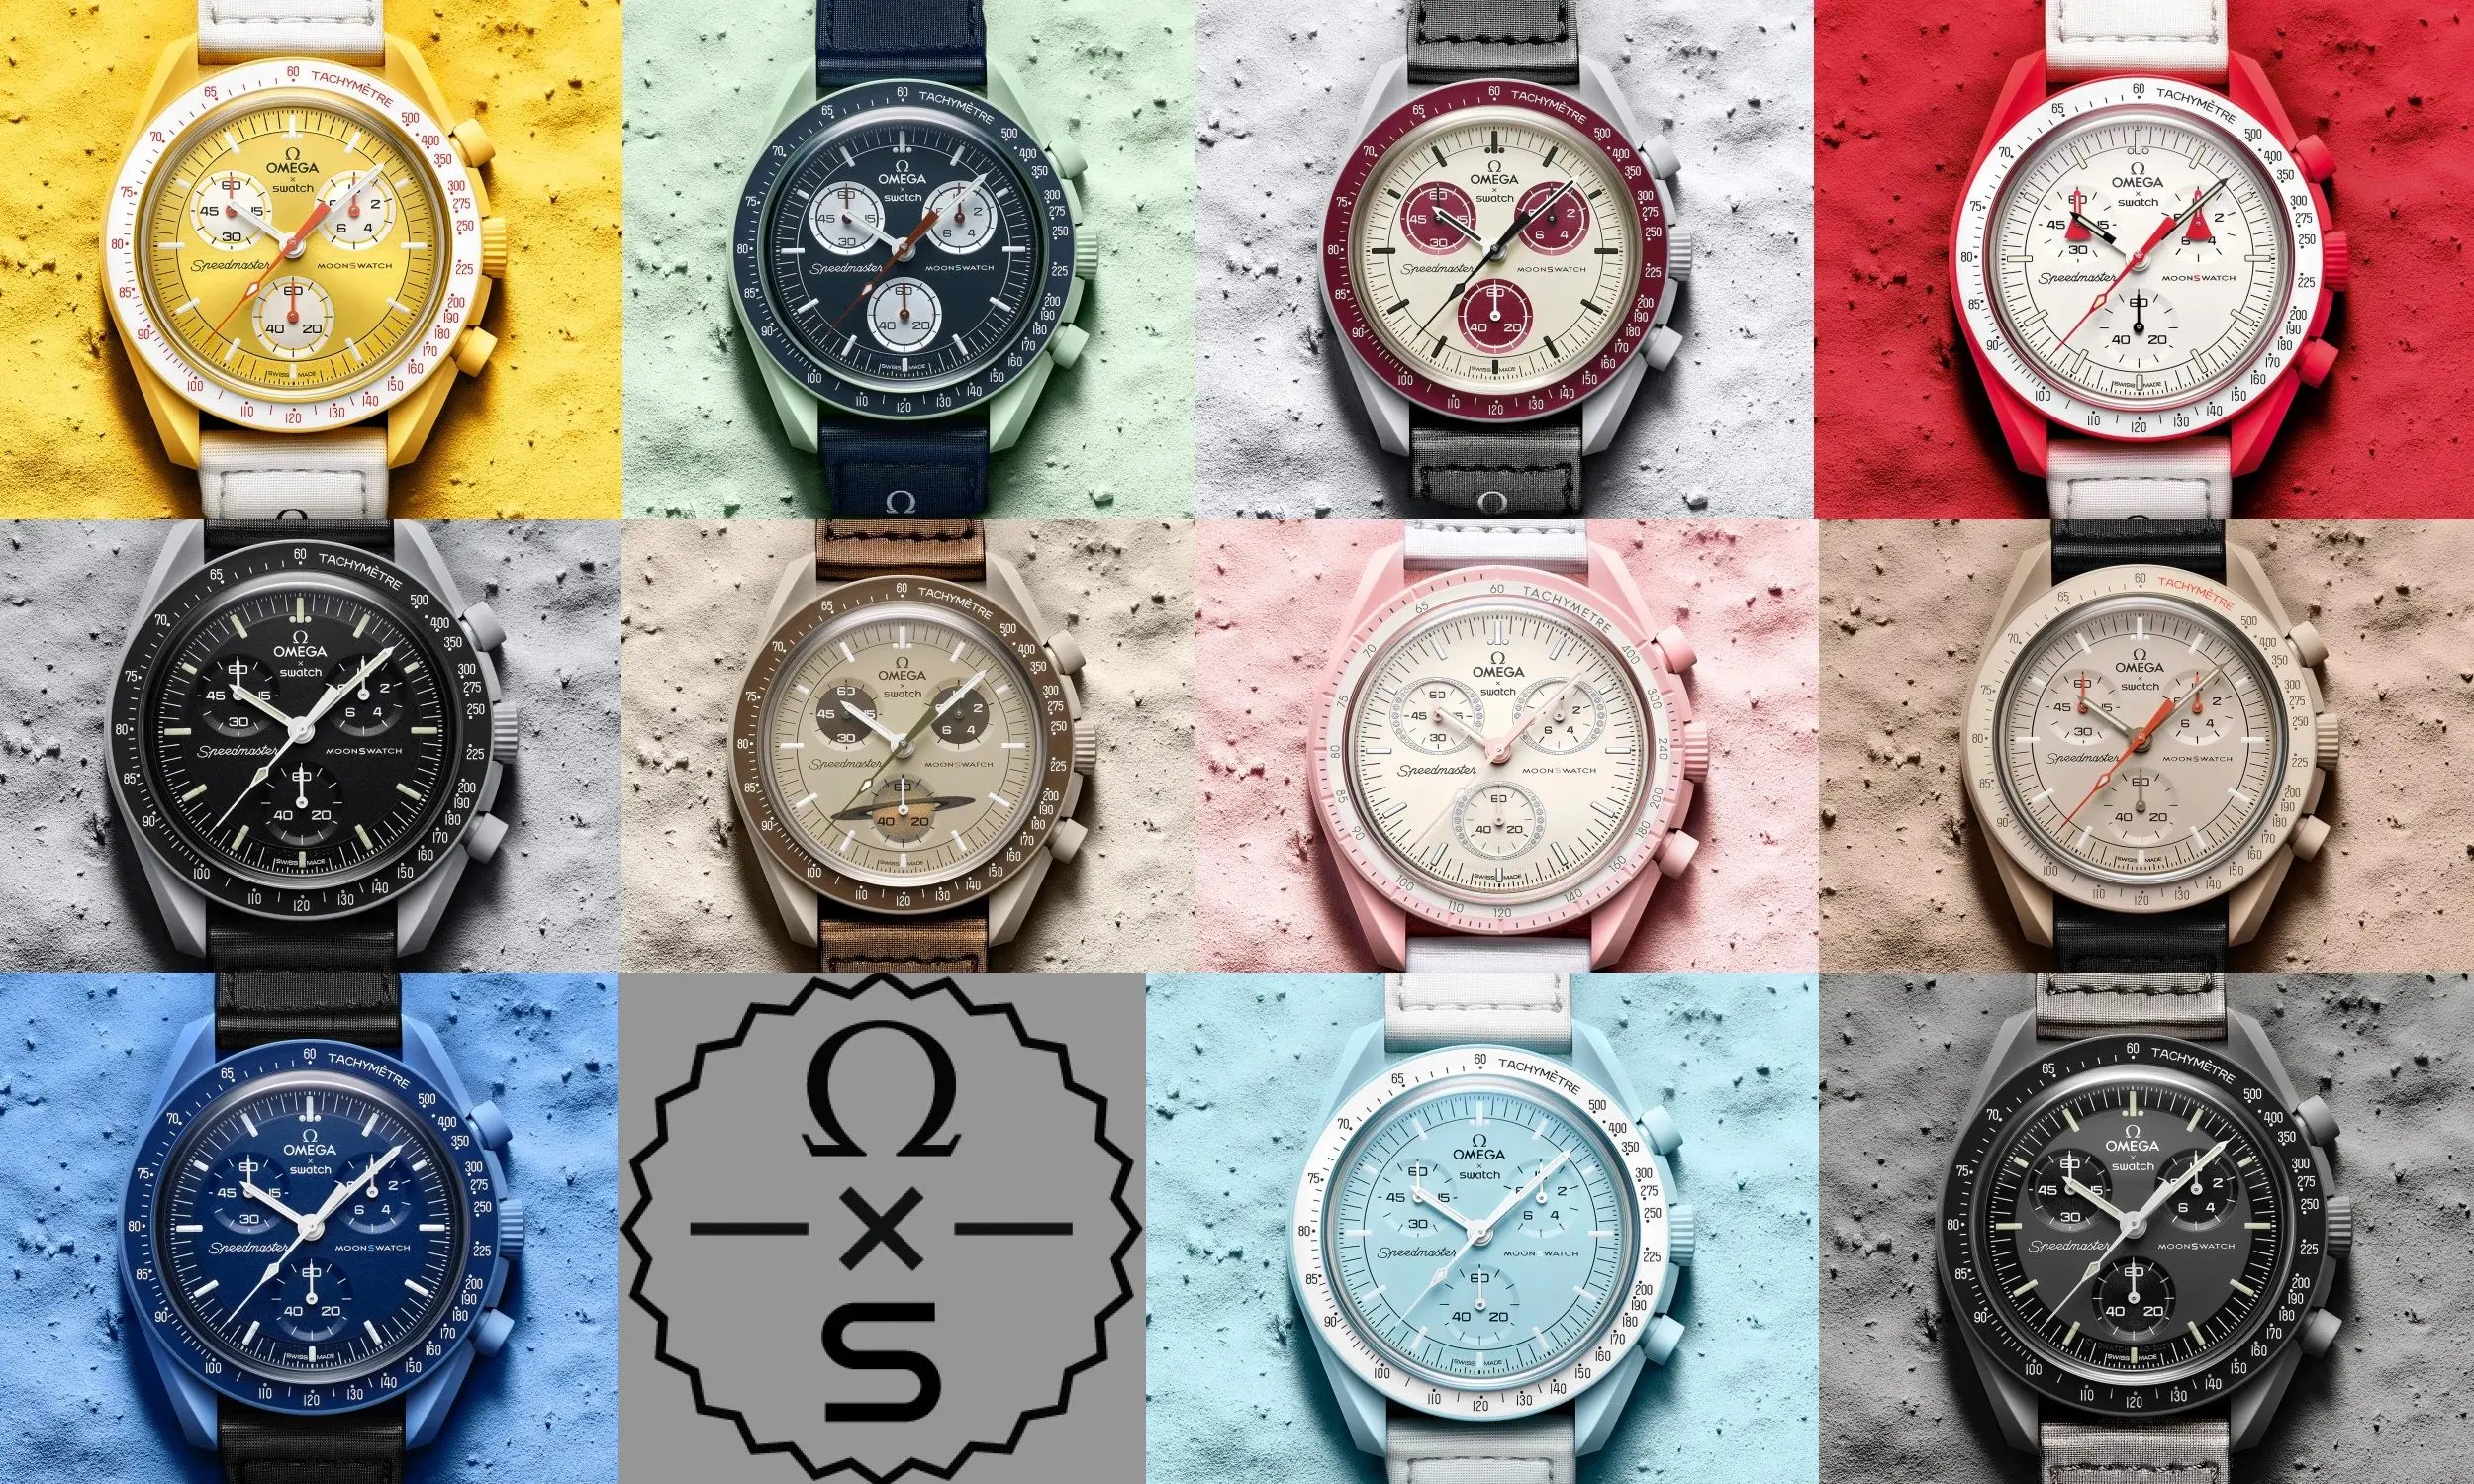 Omega x Swatch MoonSwatch Review: The Good, The Bad, The